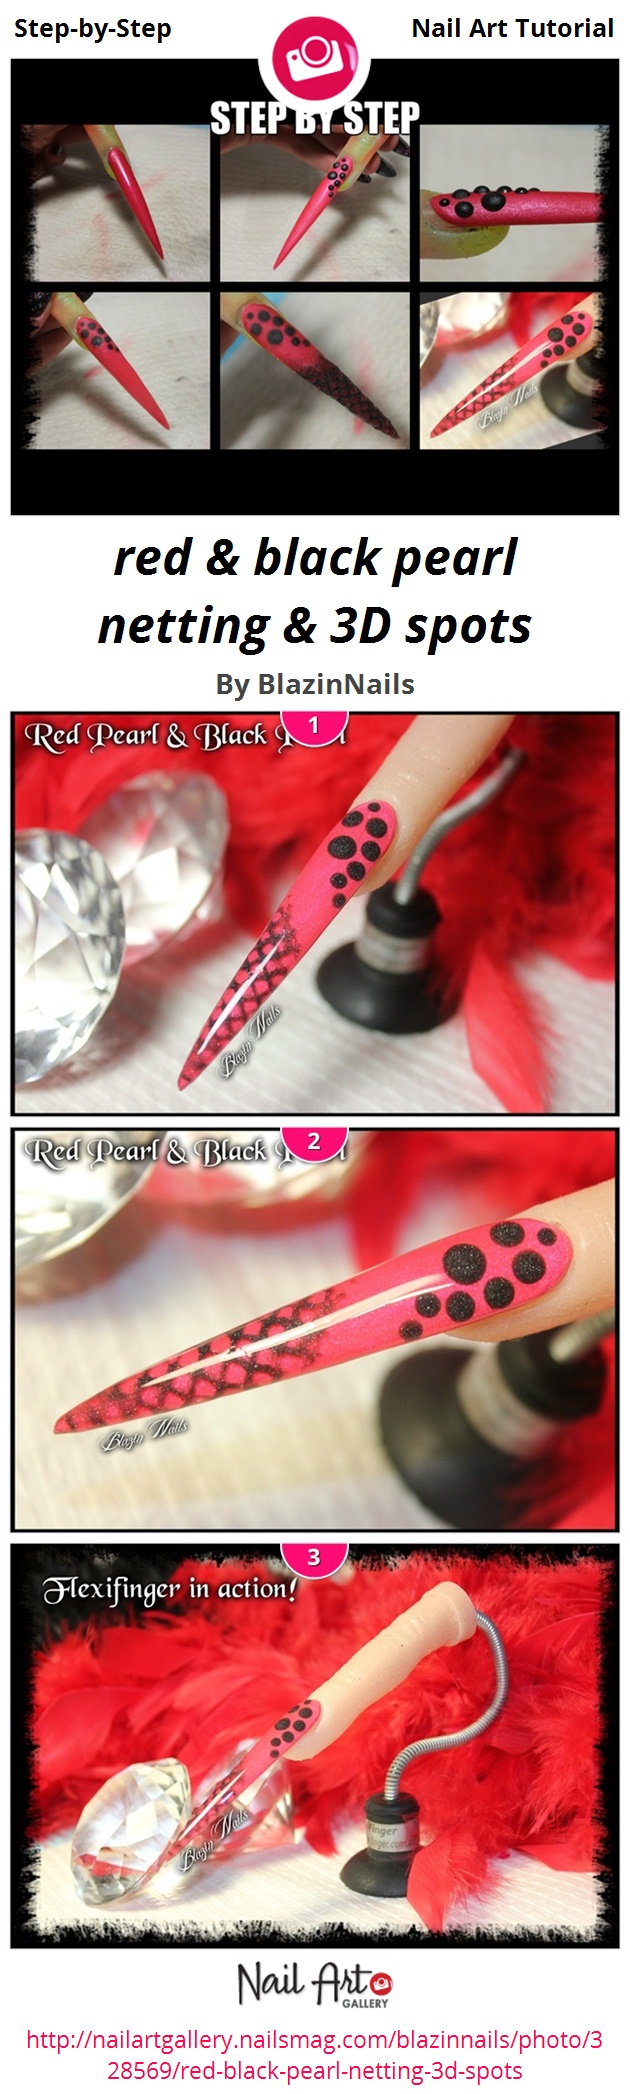 red & black pearl netting & 3D spots - Nail Art Gallery